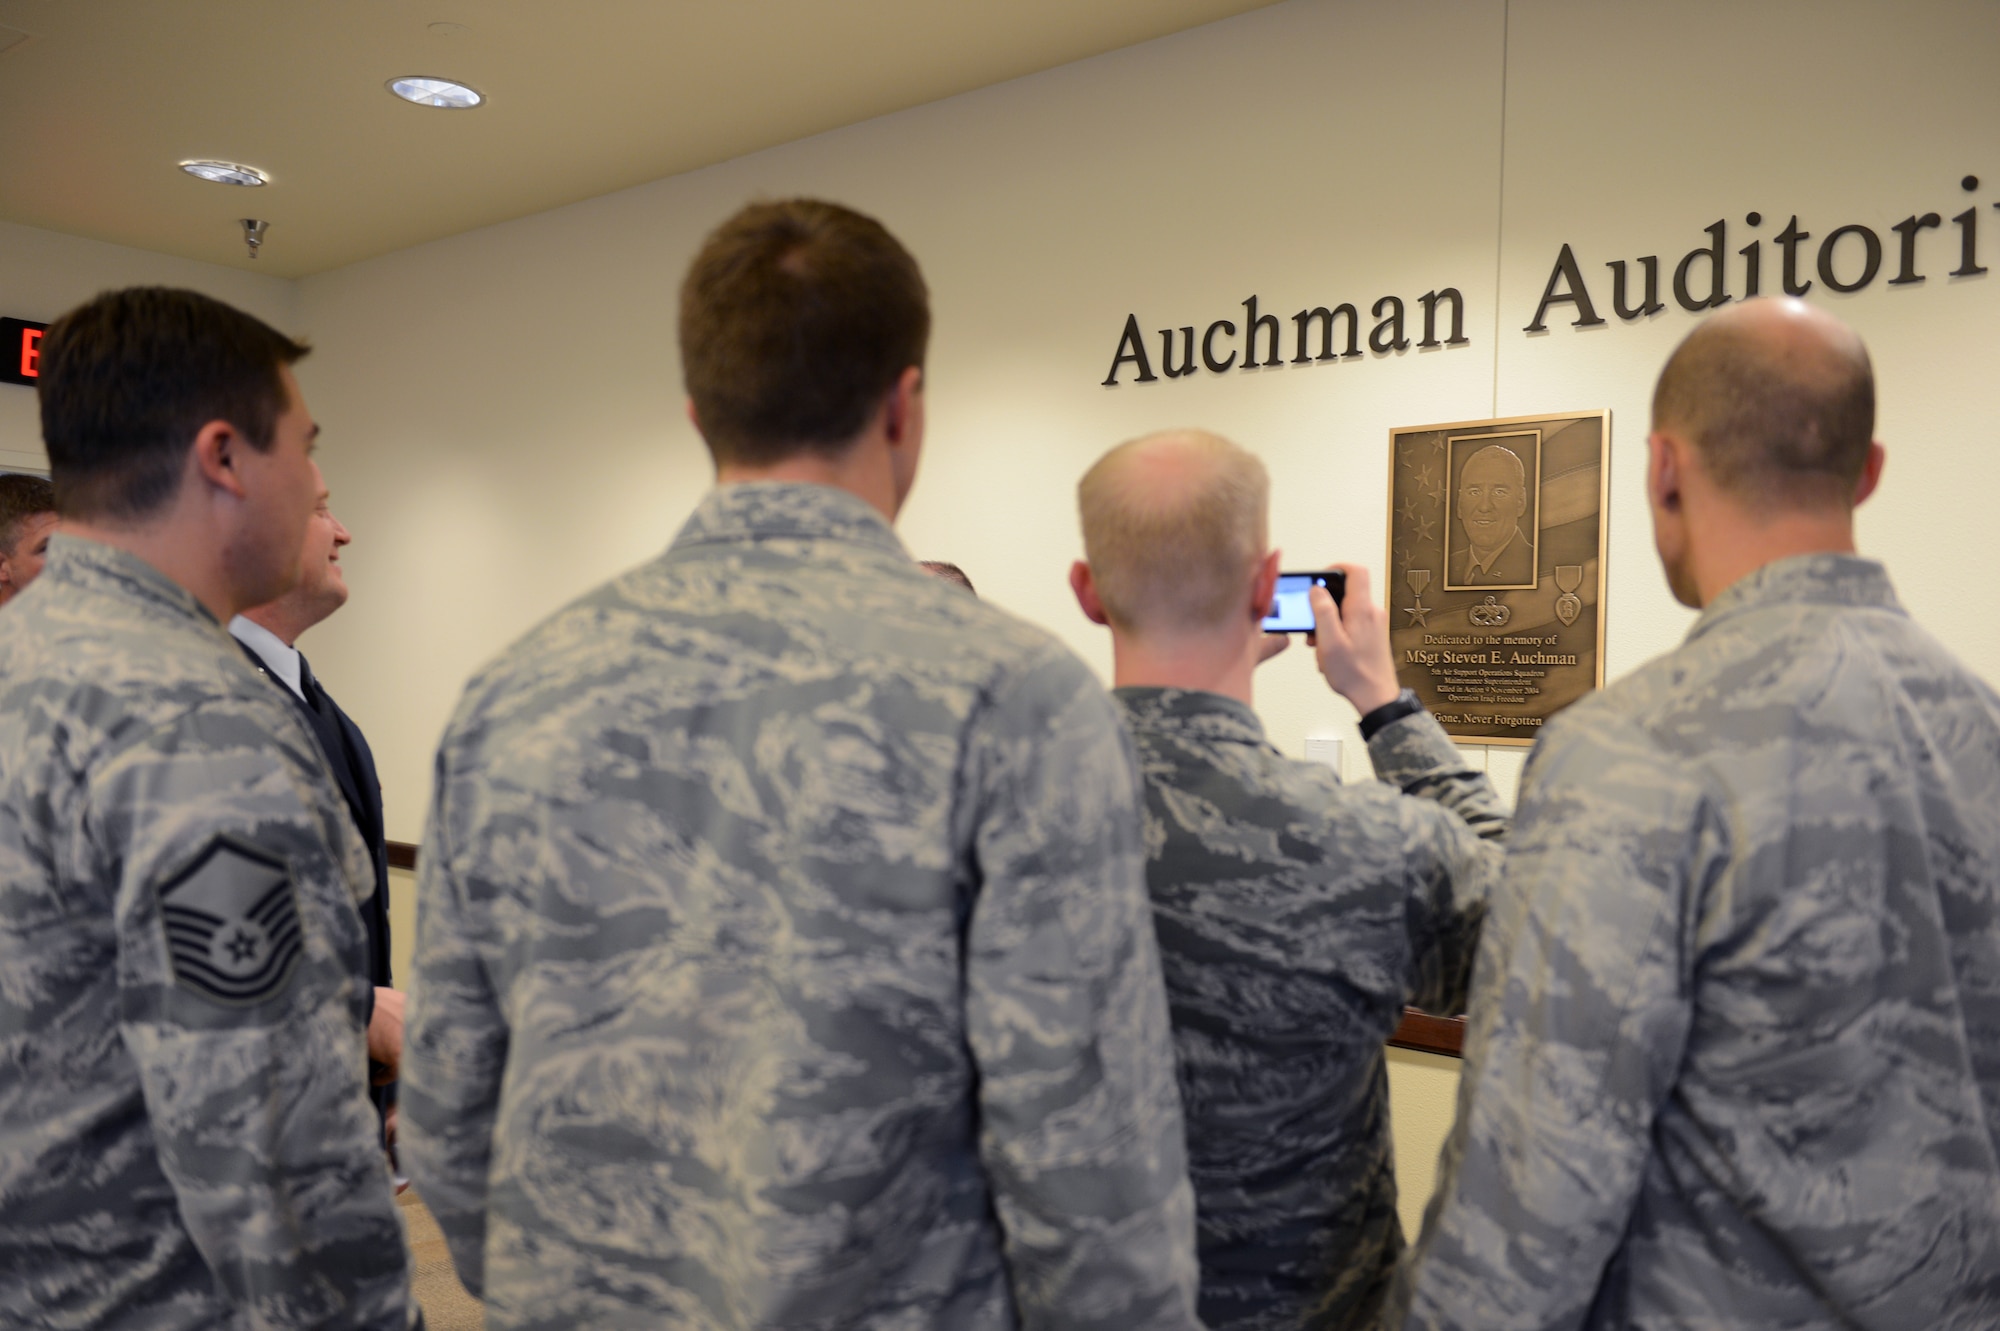 Service members from the 5th Air Support Operations Squadron view and take photos of the Auchman plaque Nov. 21, 2014, after the Auchman Auditorium Dedication Ceremony at Joint Base Lewis-McChord, Wash. Master Sgt. Steven Auchman was a maintenance superintendent at the 5th ASOS who lost his life during a Nov. 9, 2004 mortar attack in Mosul, Iraq. (U.S. Air Force photo/Airman 1st Class Keoni Chavarria)